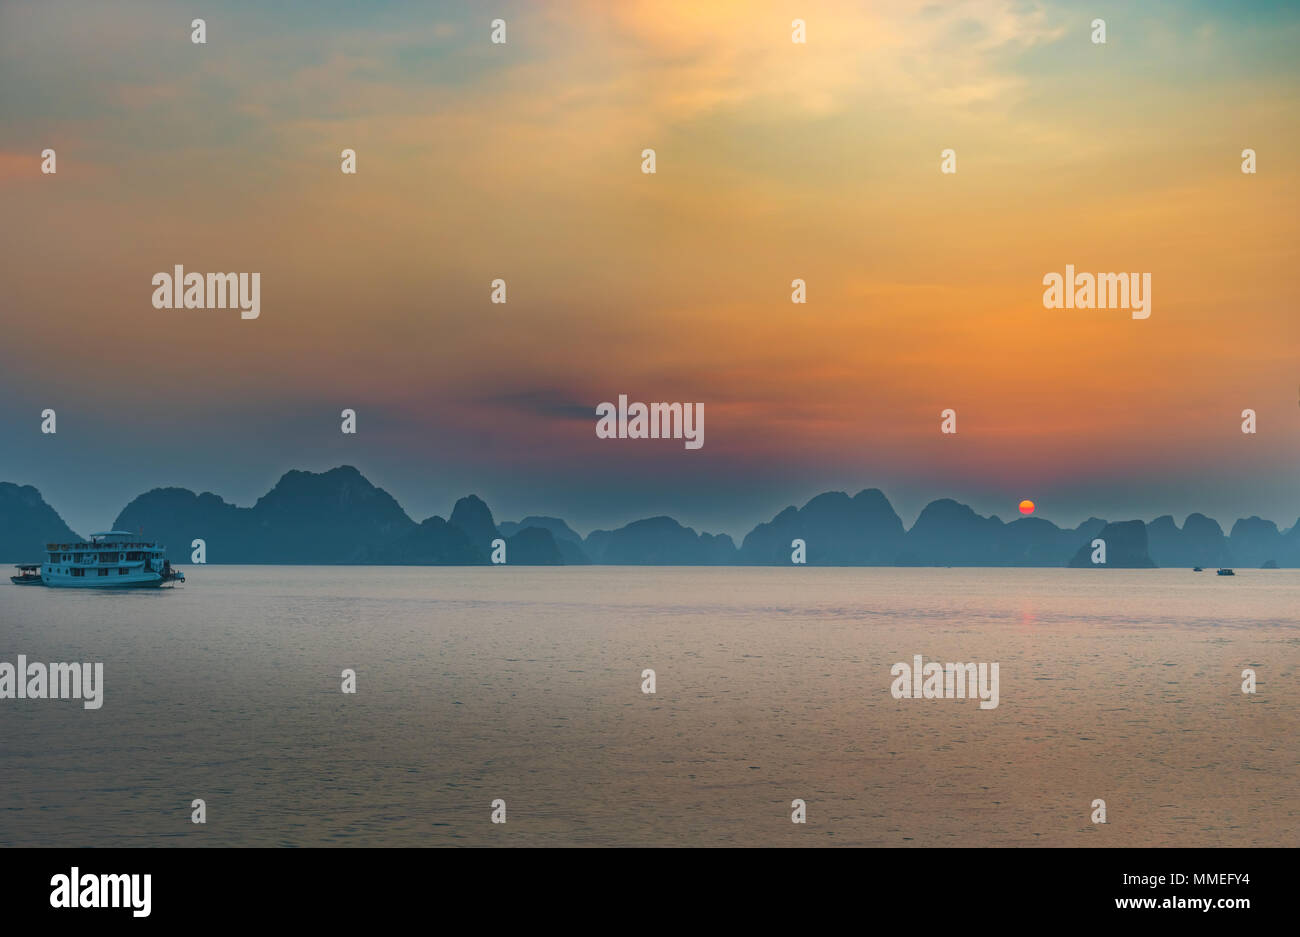 Sunset in Halong Bay, Vietnam. It is Unesco World Heritage Site and most visited place near Hanoi. Stock Photo